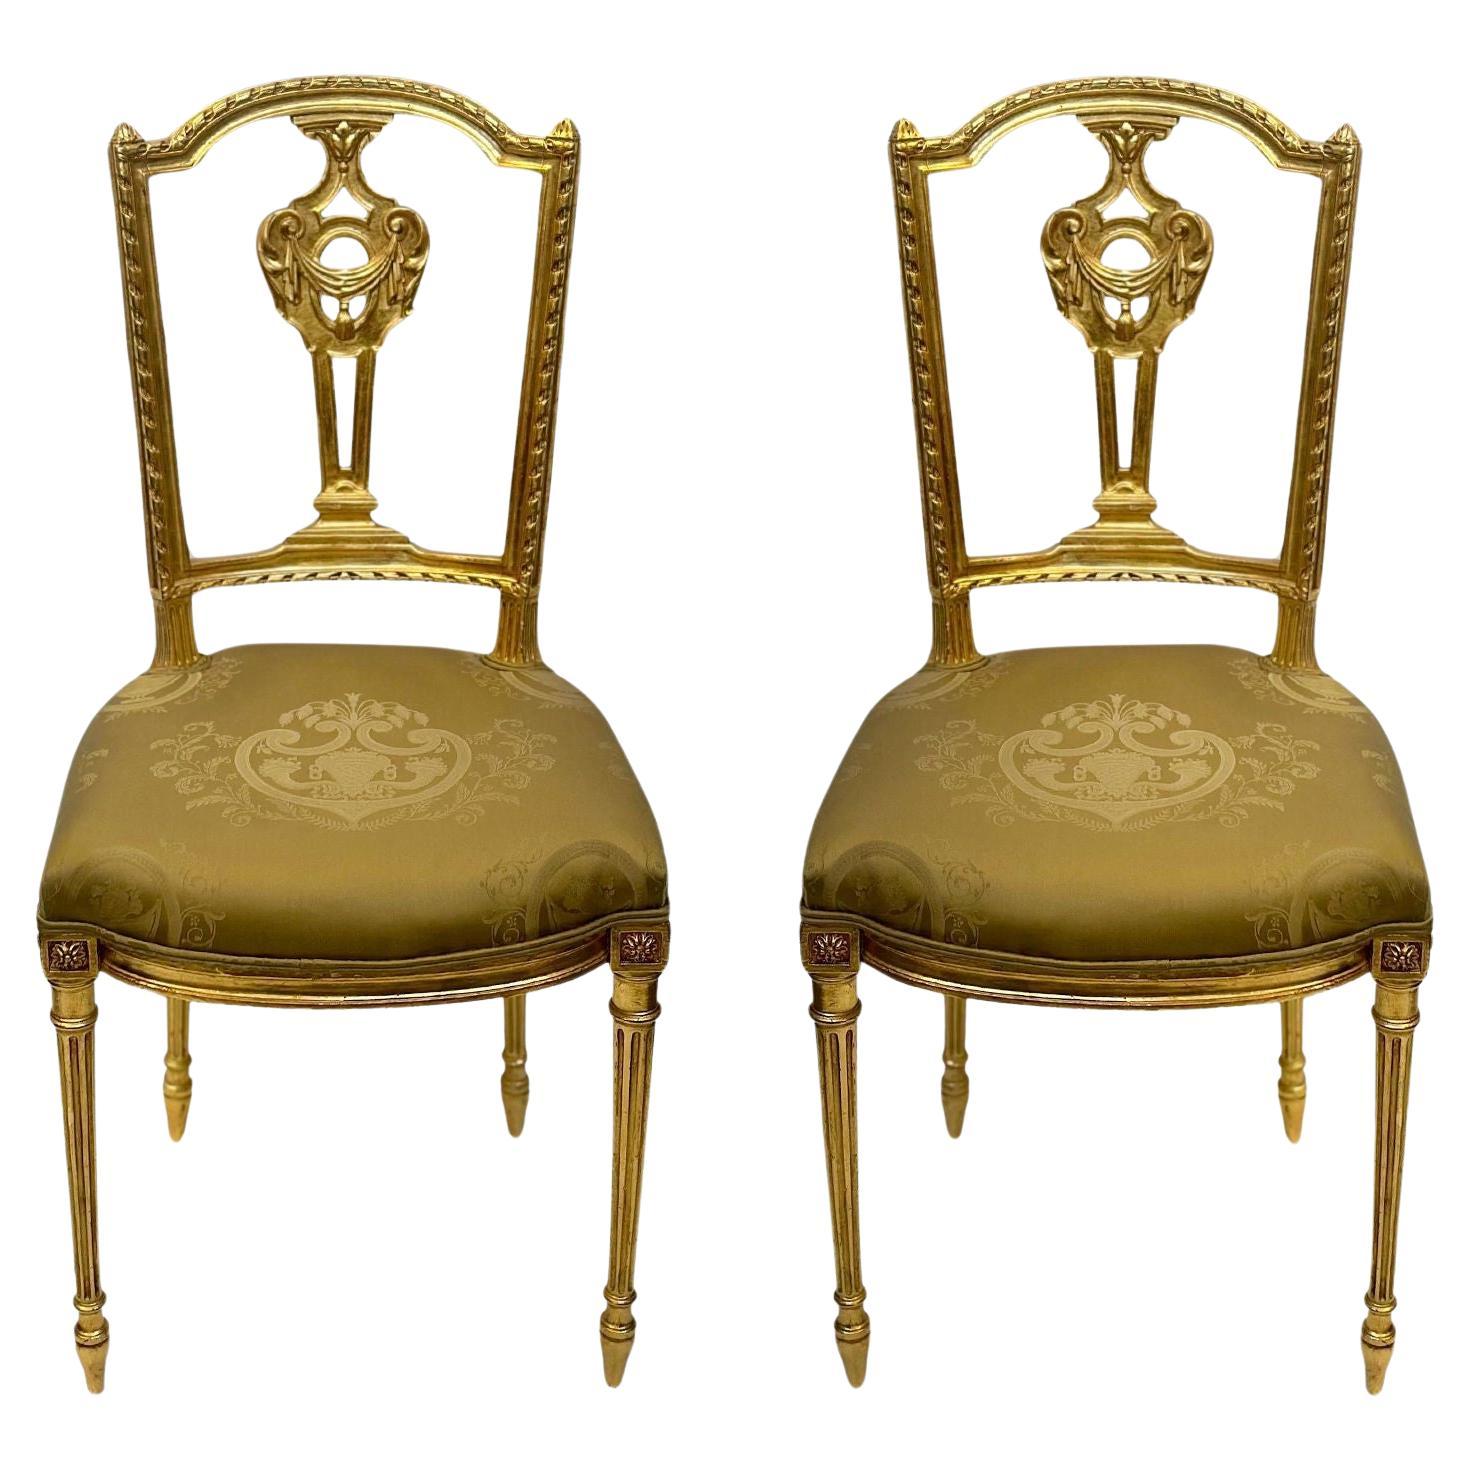 Pair of French Giltwood Accent Chairs, c. 1910's For Sale